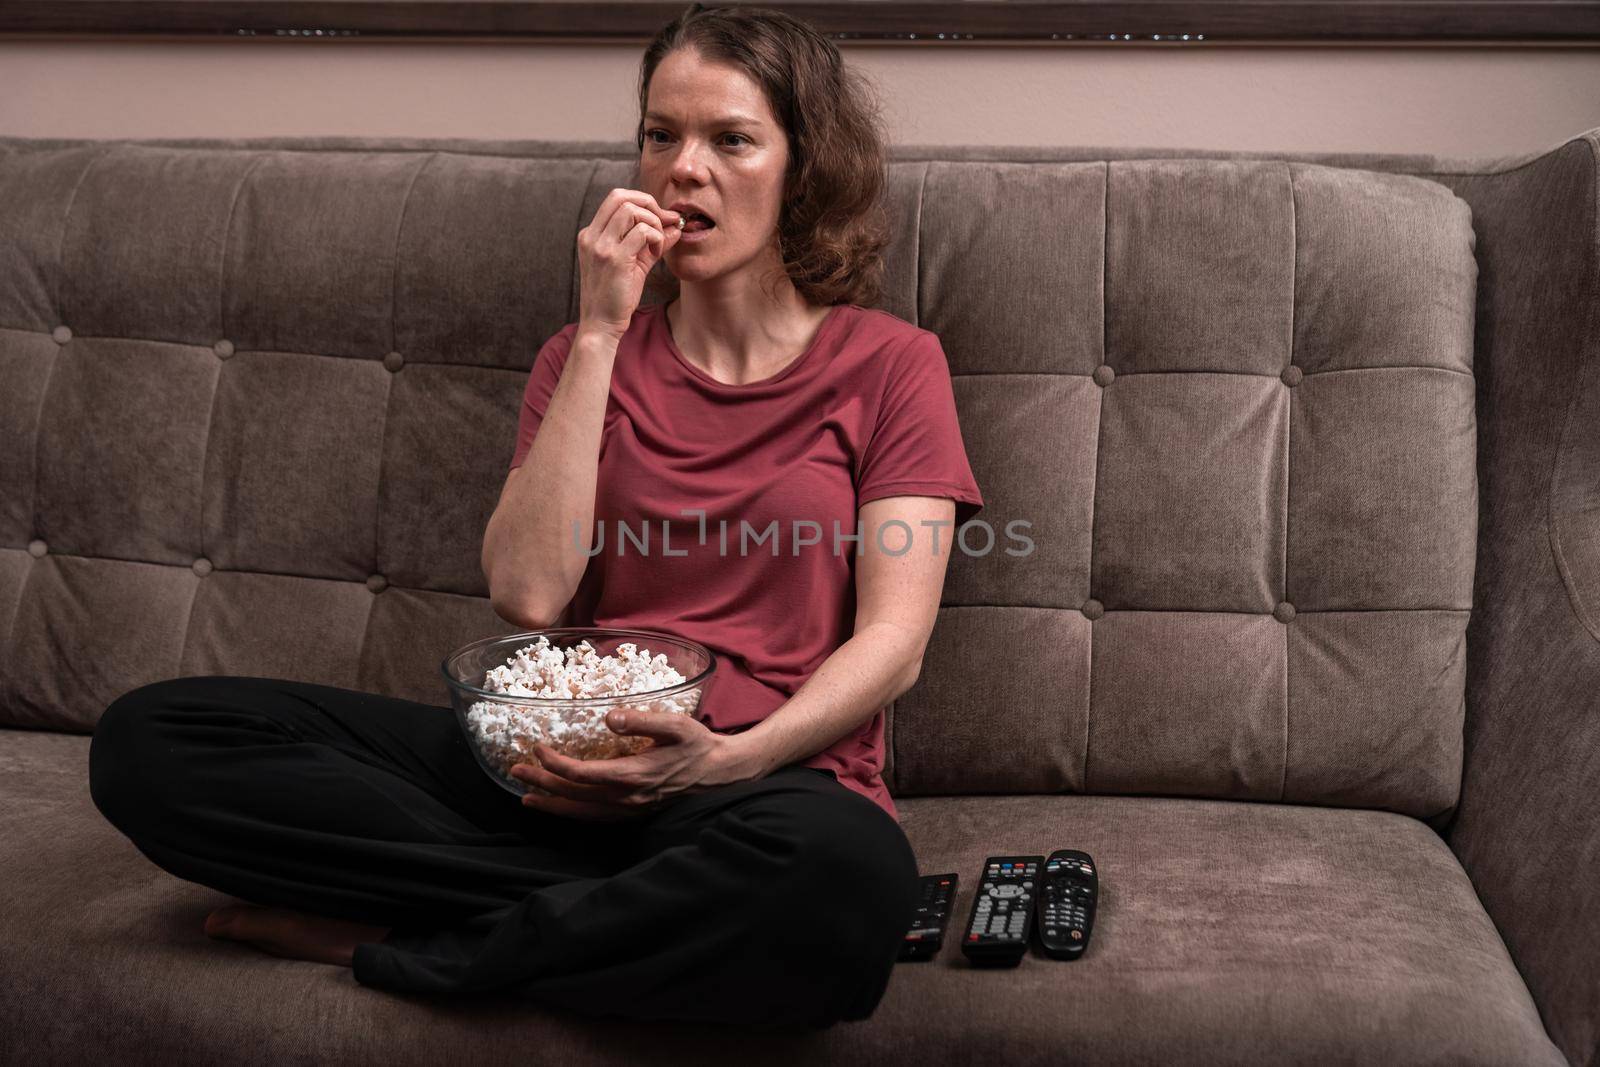 emotions when watching TV at home with popcorn. by Edophoto